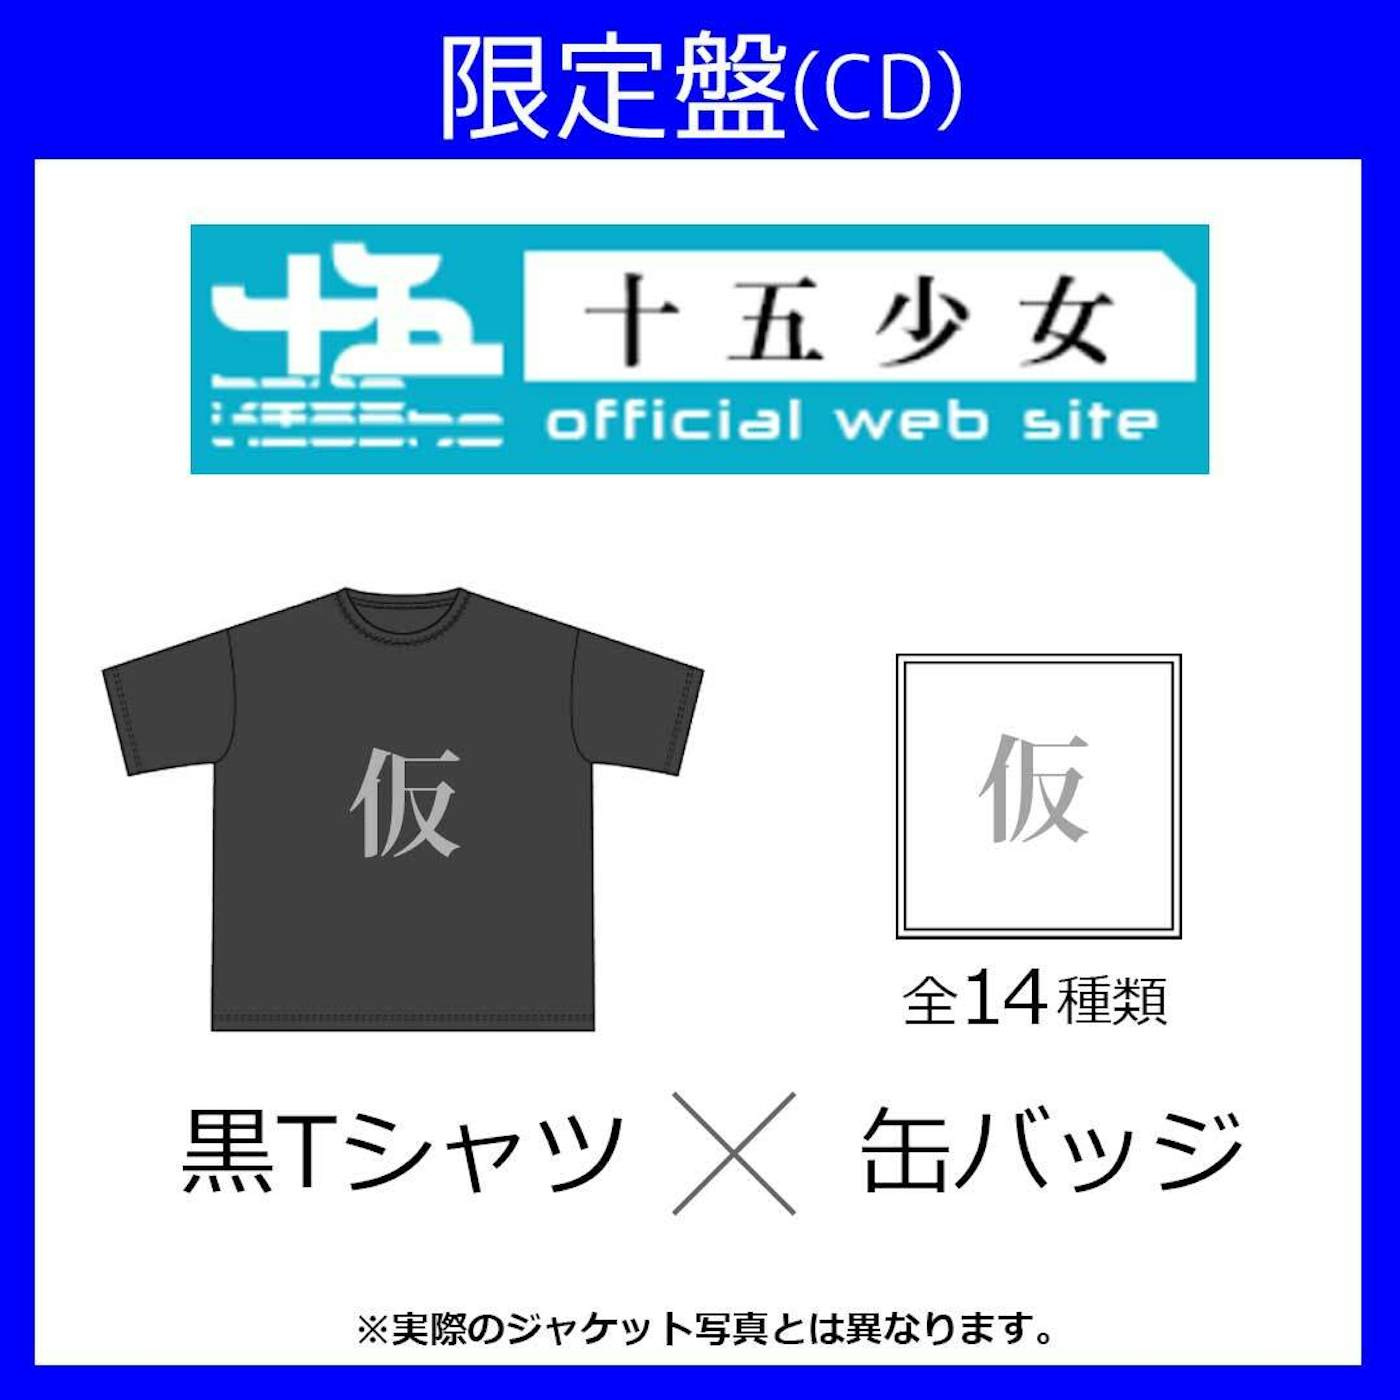 Fifteen voices ≪限定セット：缶バッジ×黒Tシャツ(M)≫SILENTHATED(2枚組AL+スマプラ)